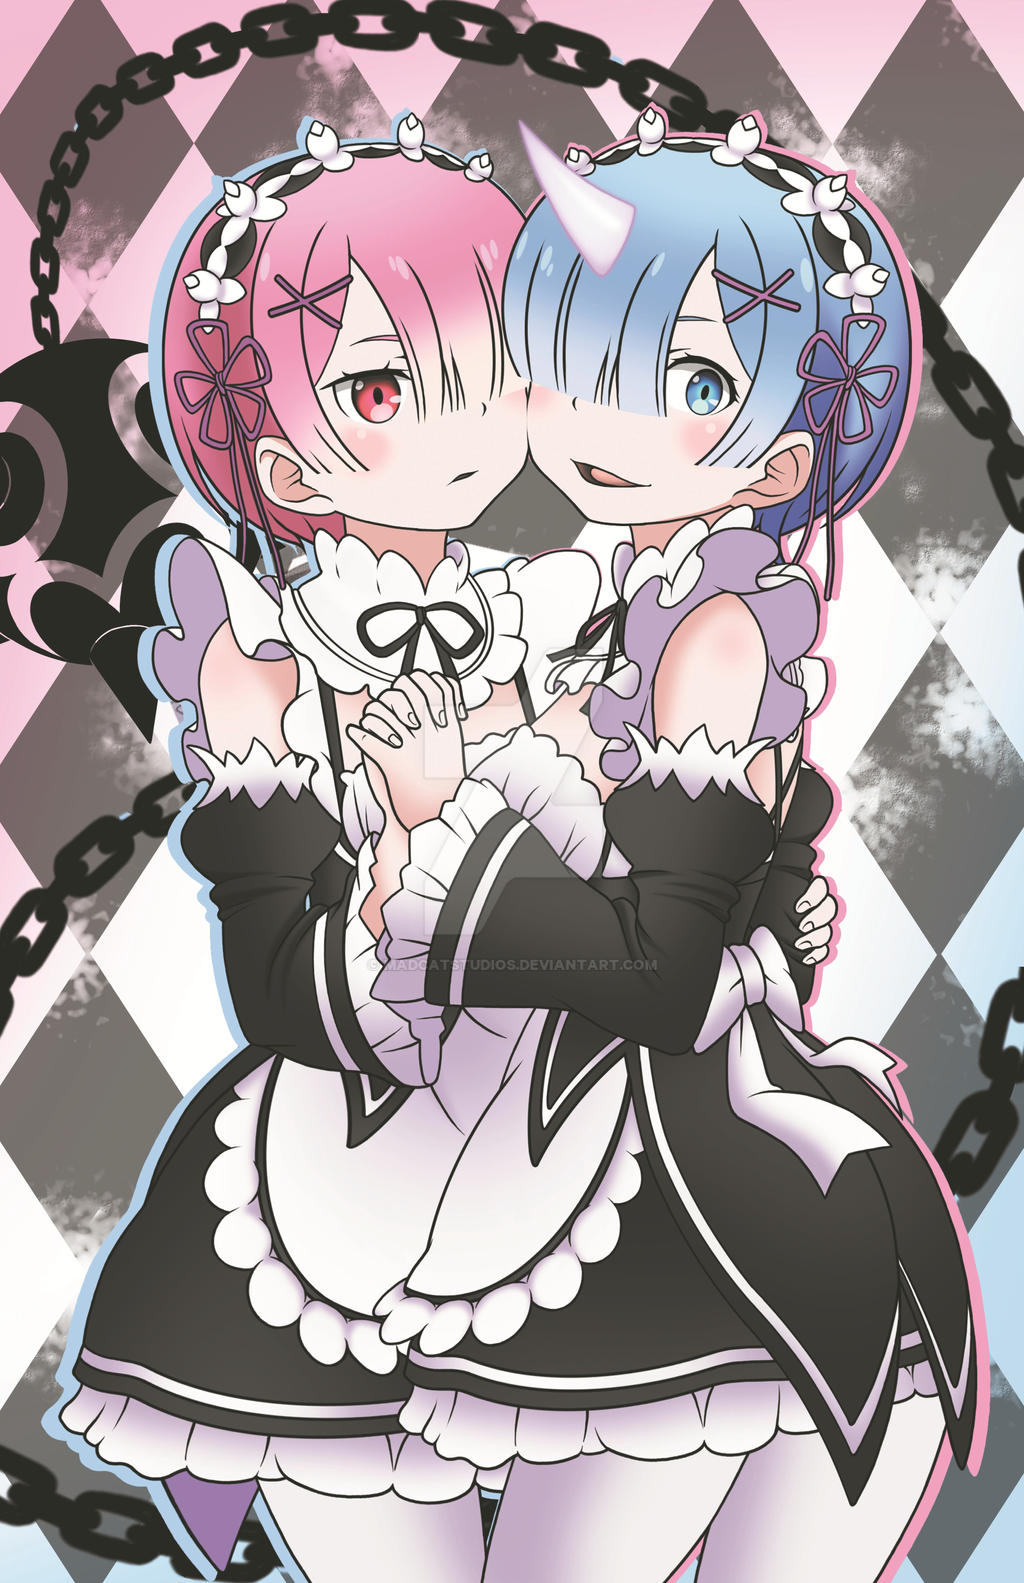 Ram and Rem - Re:Zero by OneWhoWatchesFires on DeviantArt